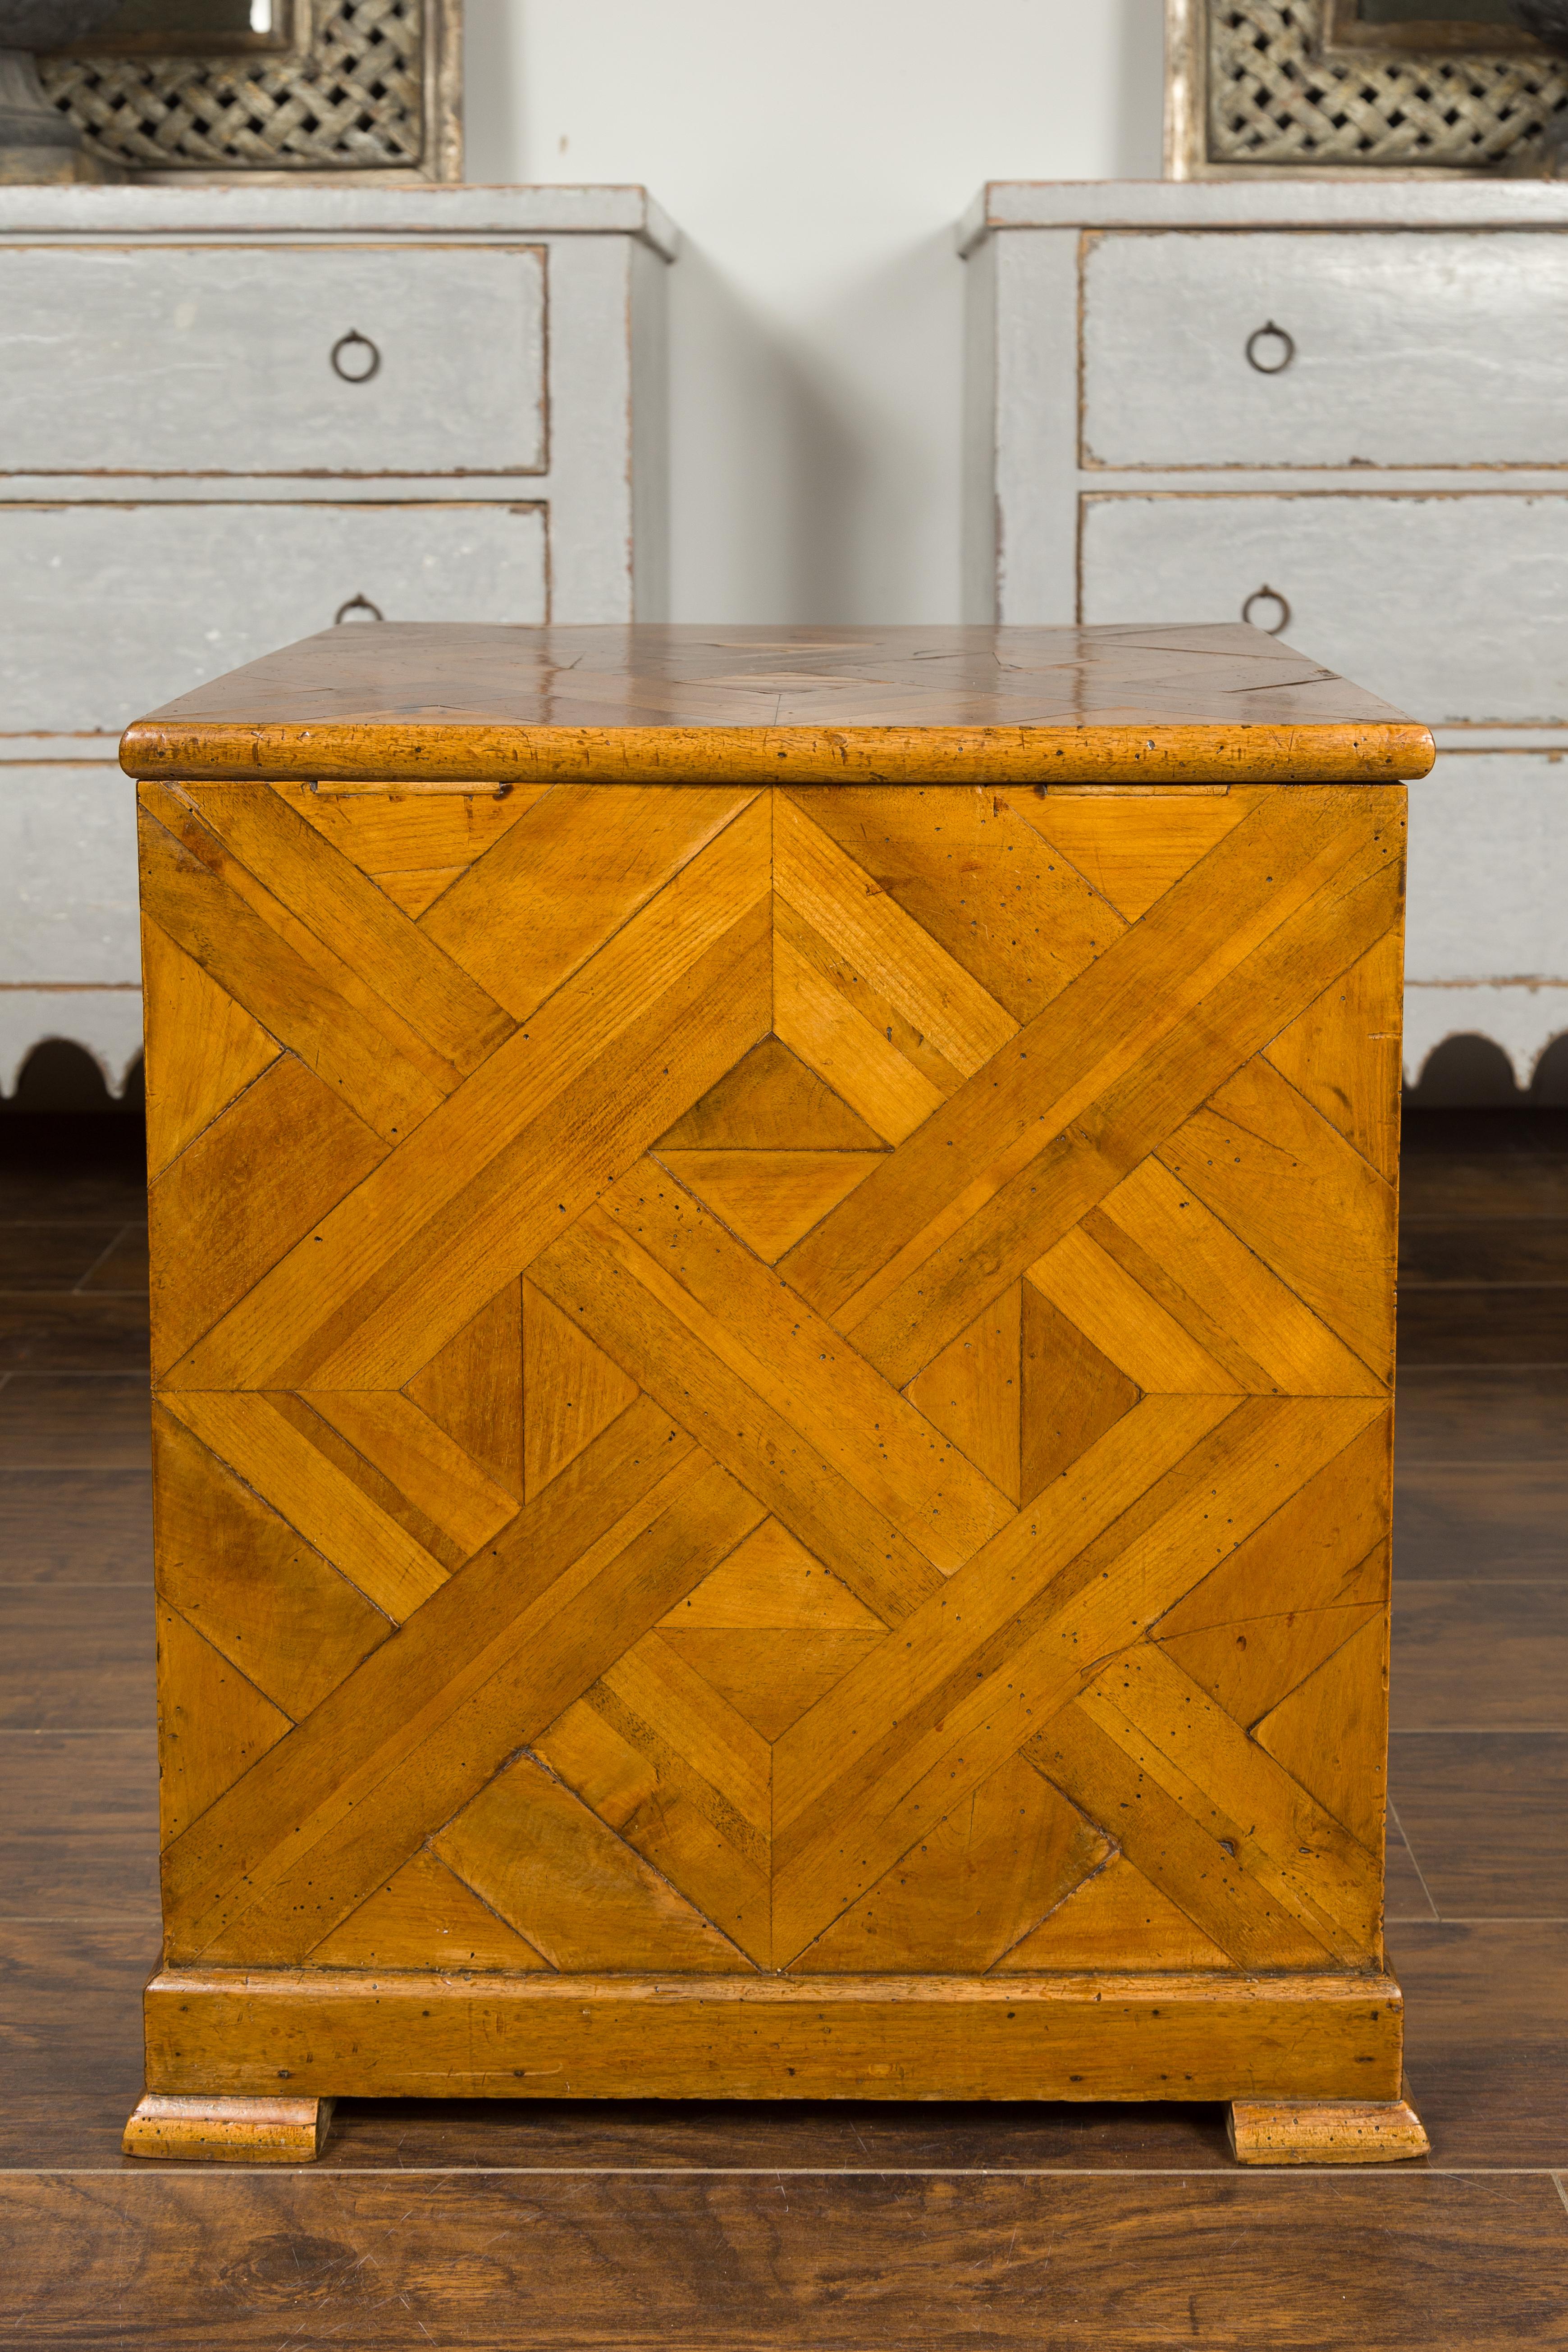 19th Century Large Italian 1820s Walnut Box with Parquetry Decor and Inner Wicker Basket